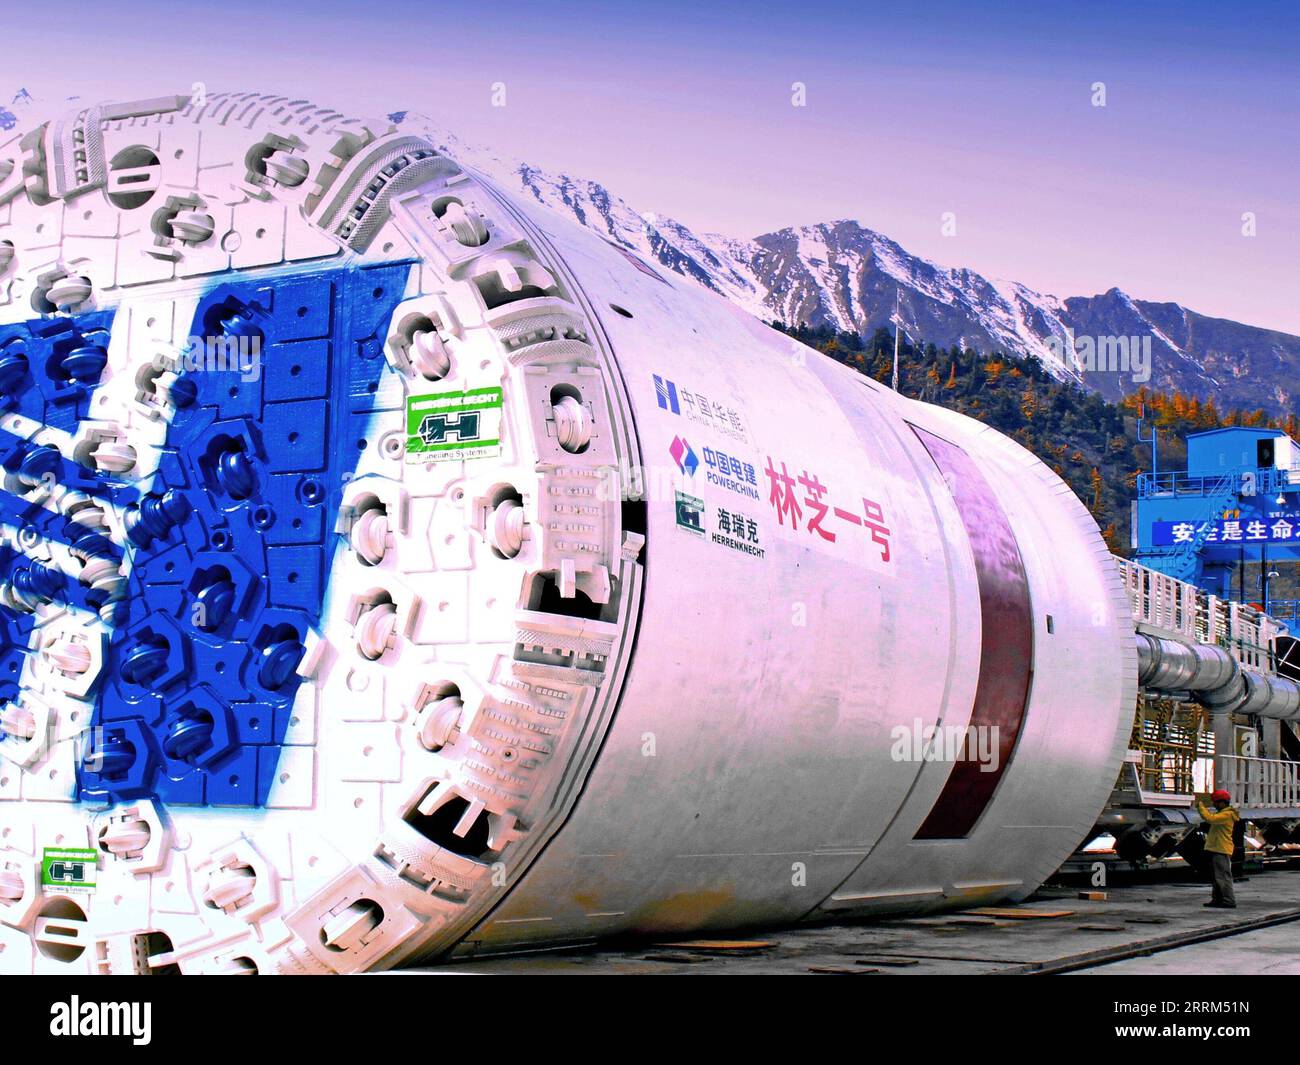 221001 -- LHASA, Oct. 1, 2022 -- Photo taken on Oct. 29, 2015 shows the tunnel boring machine TBM being completed for the construction of Doxong Pass tunnel on the highway linking Pad Township in the city of Nyingchi and Medog County, southwest China s Tibet Autonomous Region. The 67.22-km road connects Pad Township in the city of Nyingchi and Medog County. It is the second passageway to Medog, following the first one connecting the county and Zhamog Township, Bomi County. After the new highway opens to traffic, the length of the road connecting the city proper of Nyingchi and Medog County wil Stock Photo